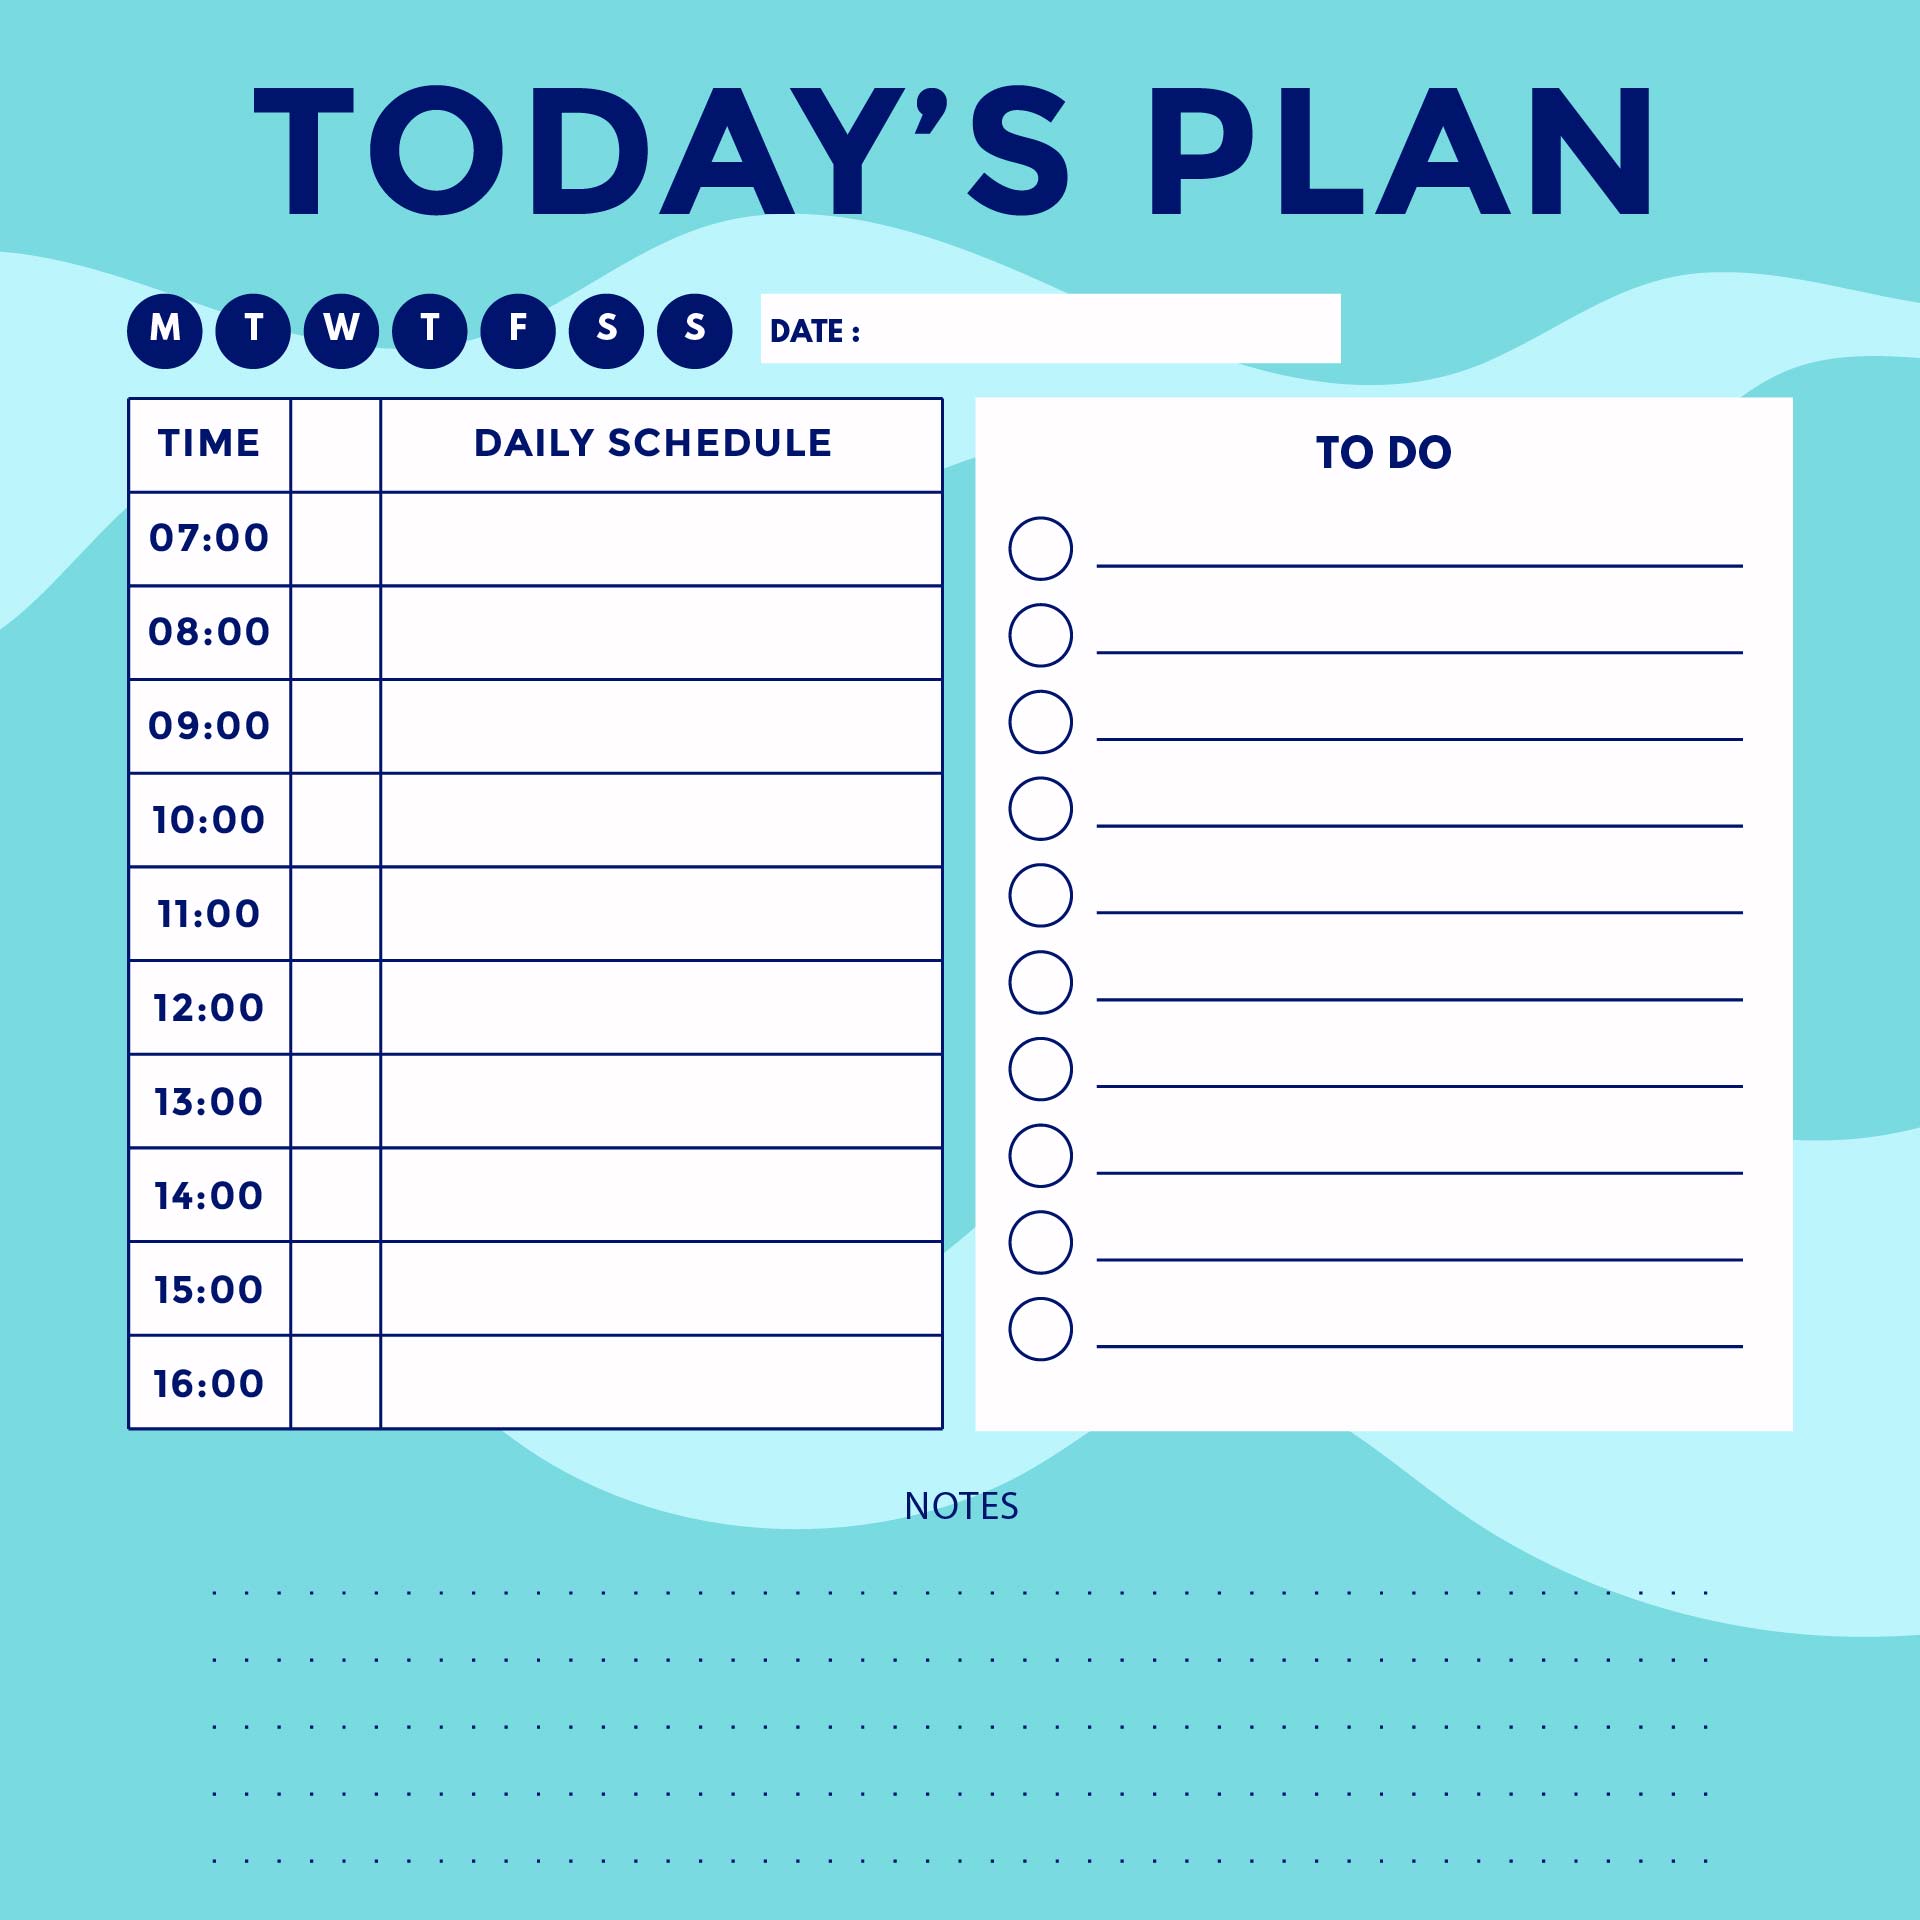 7-best-images-of-weekly-hourly-schedule-printable-printable-daily